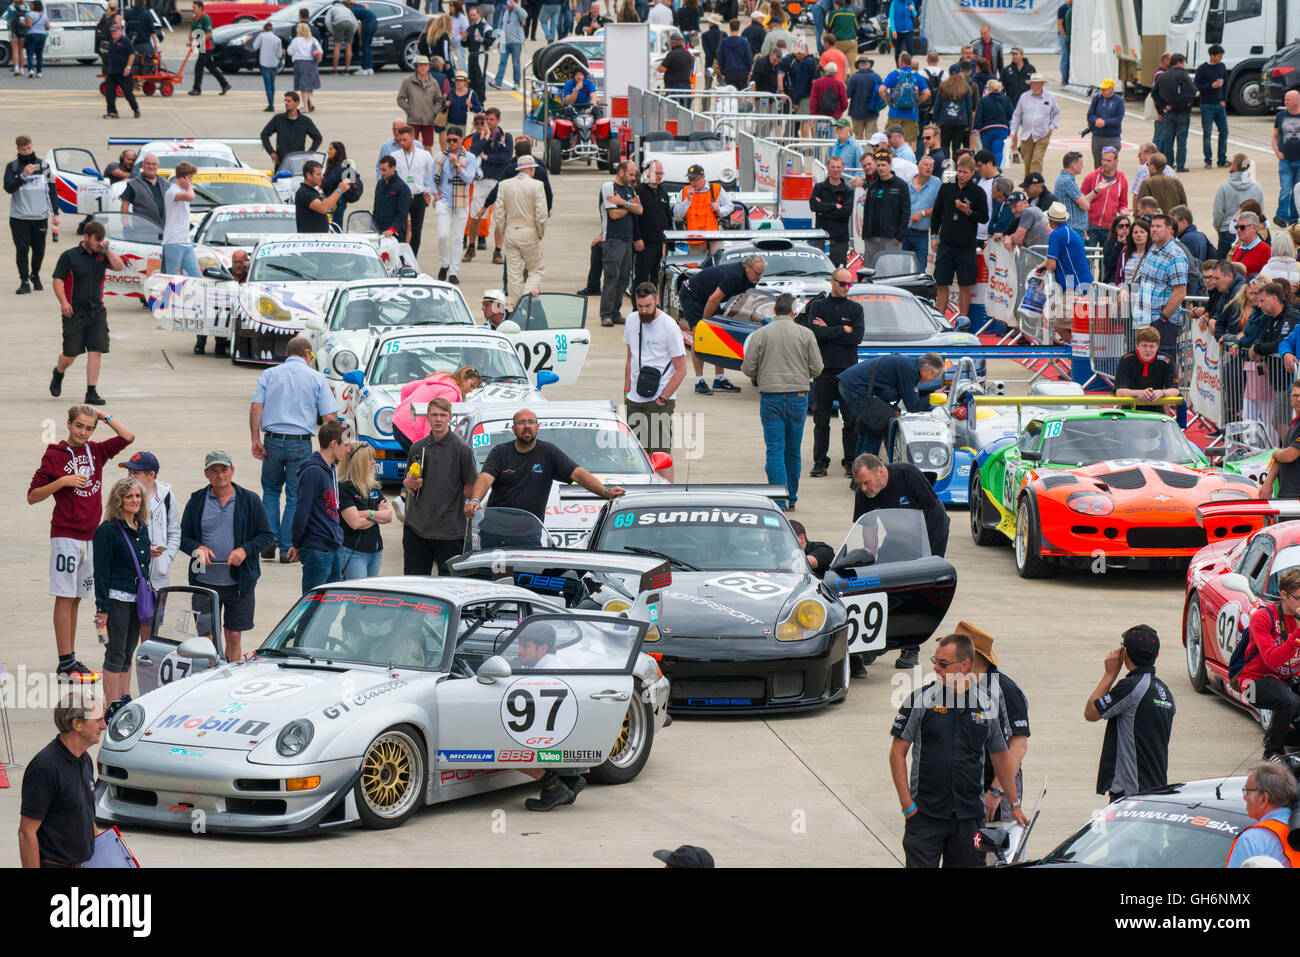 Sports cars lined up in the paddock at Silverstone Classic motor racing event, England, UK Stock Photo